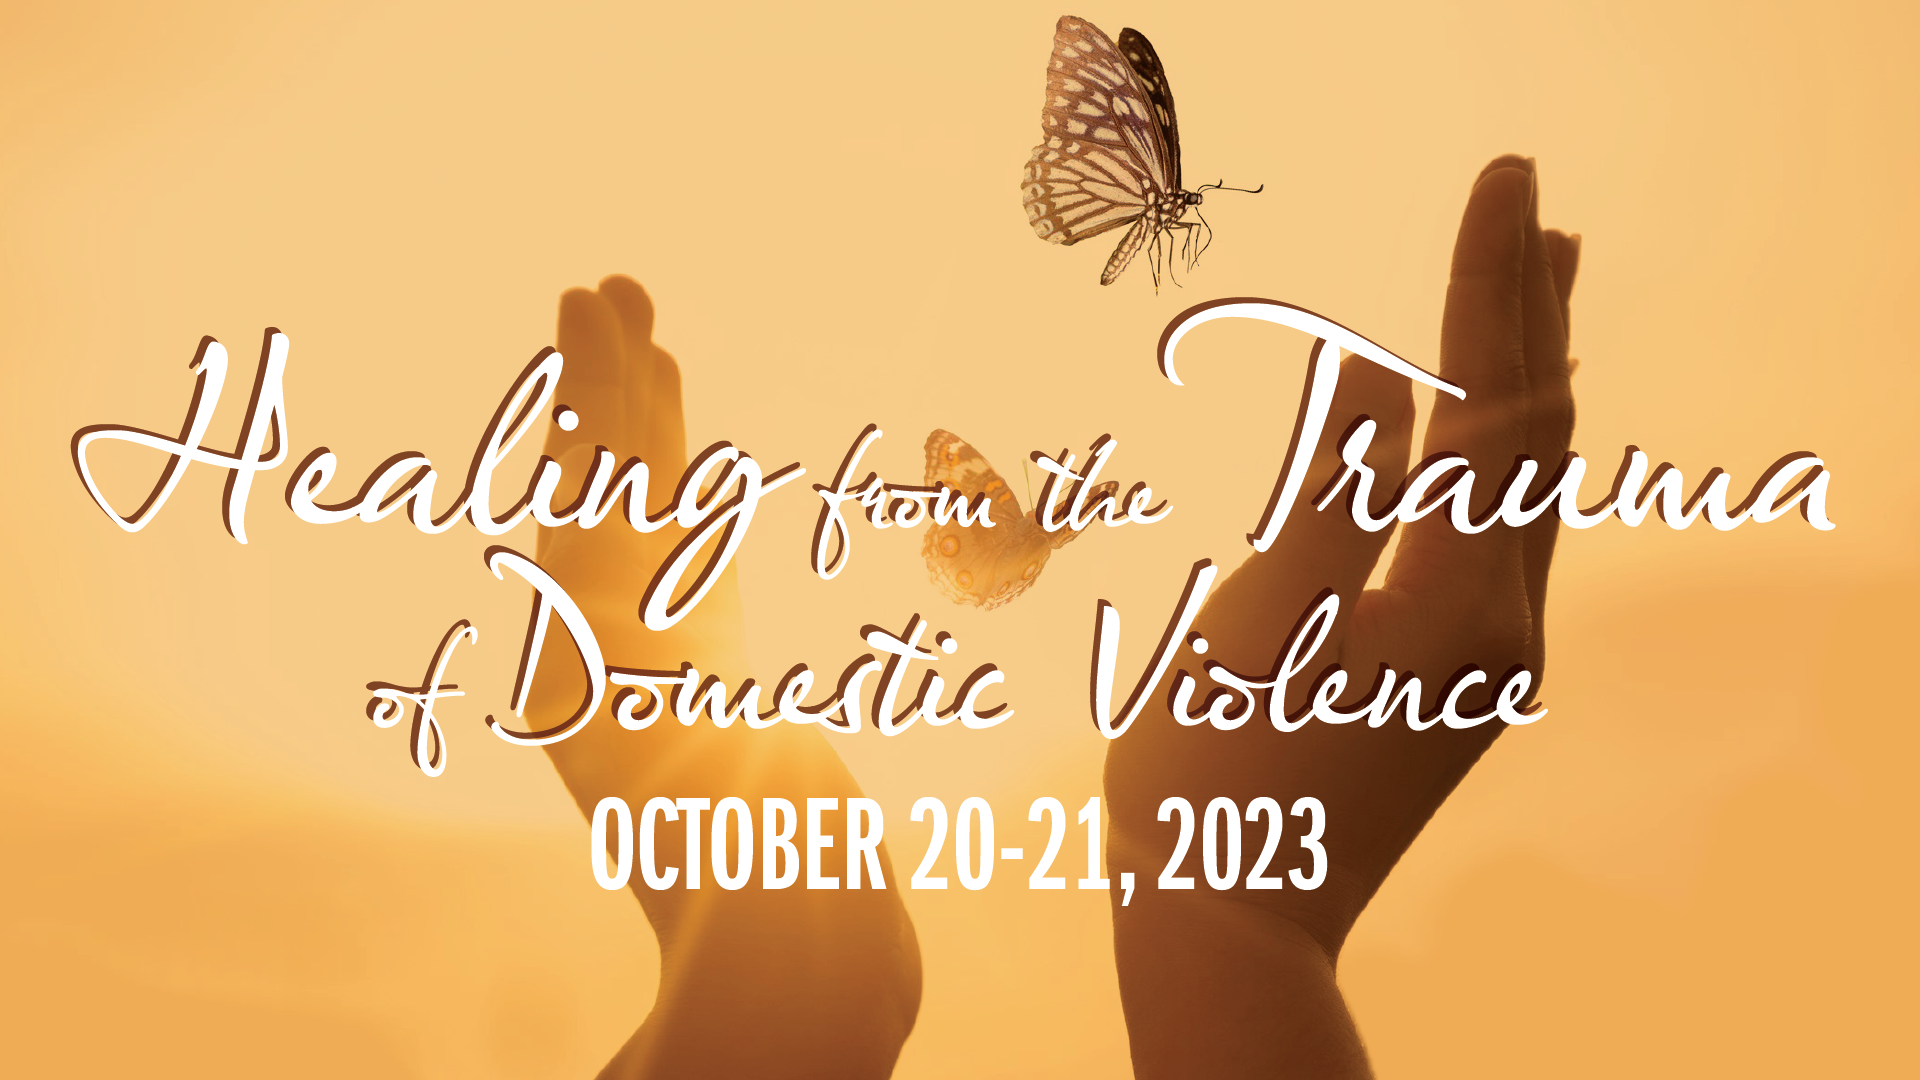 Featured image for “Domestic Violence seminar to introduce Triumph Over Trauma”